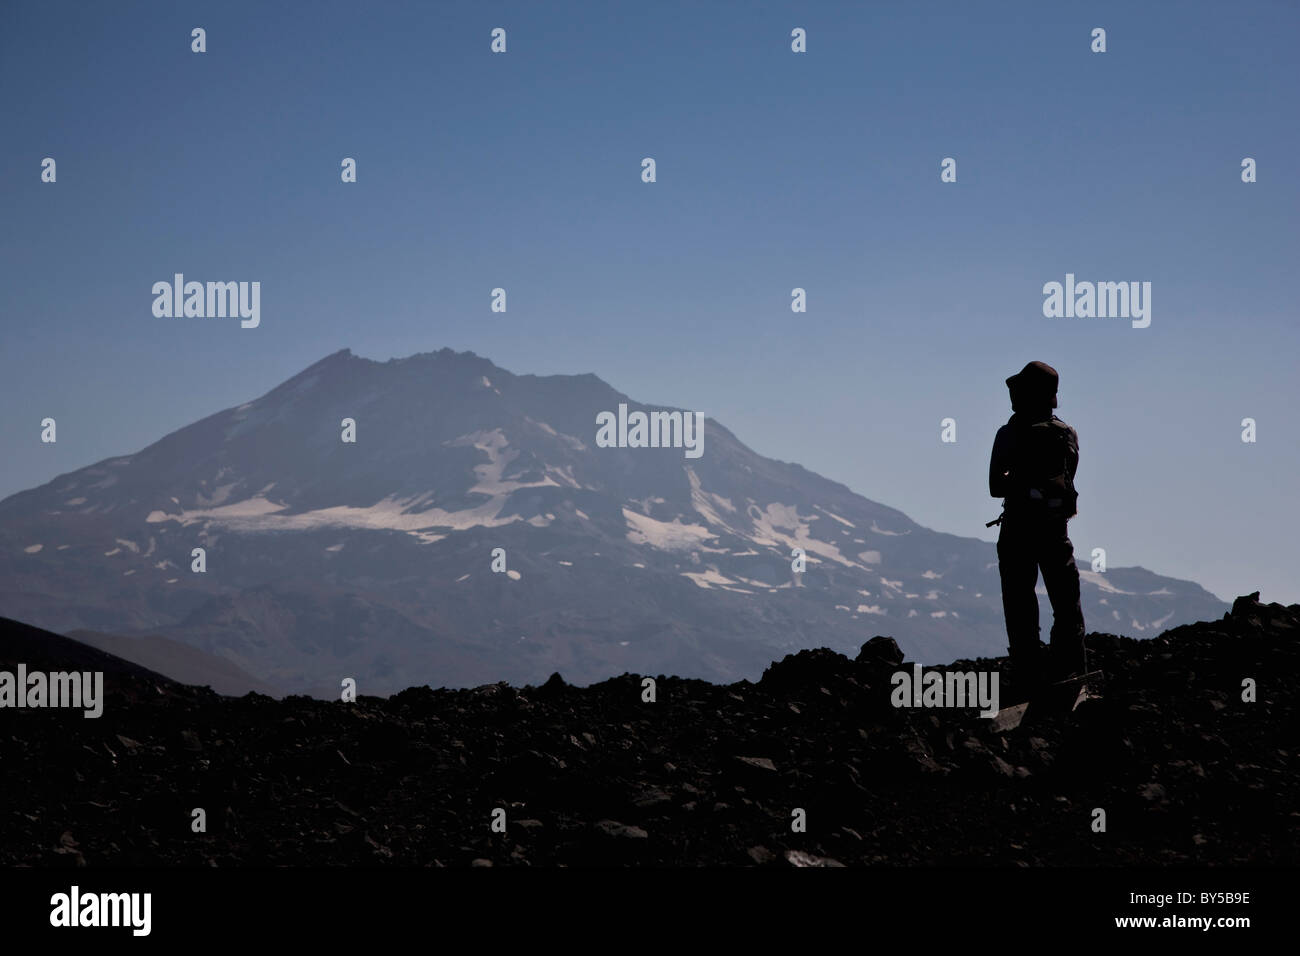 Rear view of a woman looking at a mountain view, Lonquimay Volcano, Patagonia, Chile Stock Photo